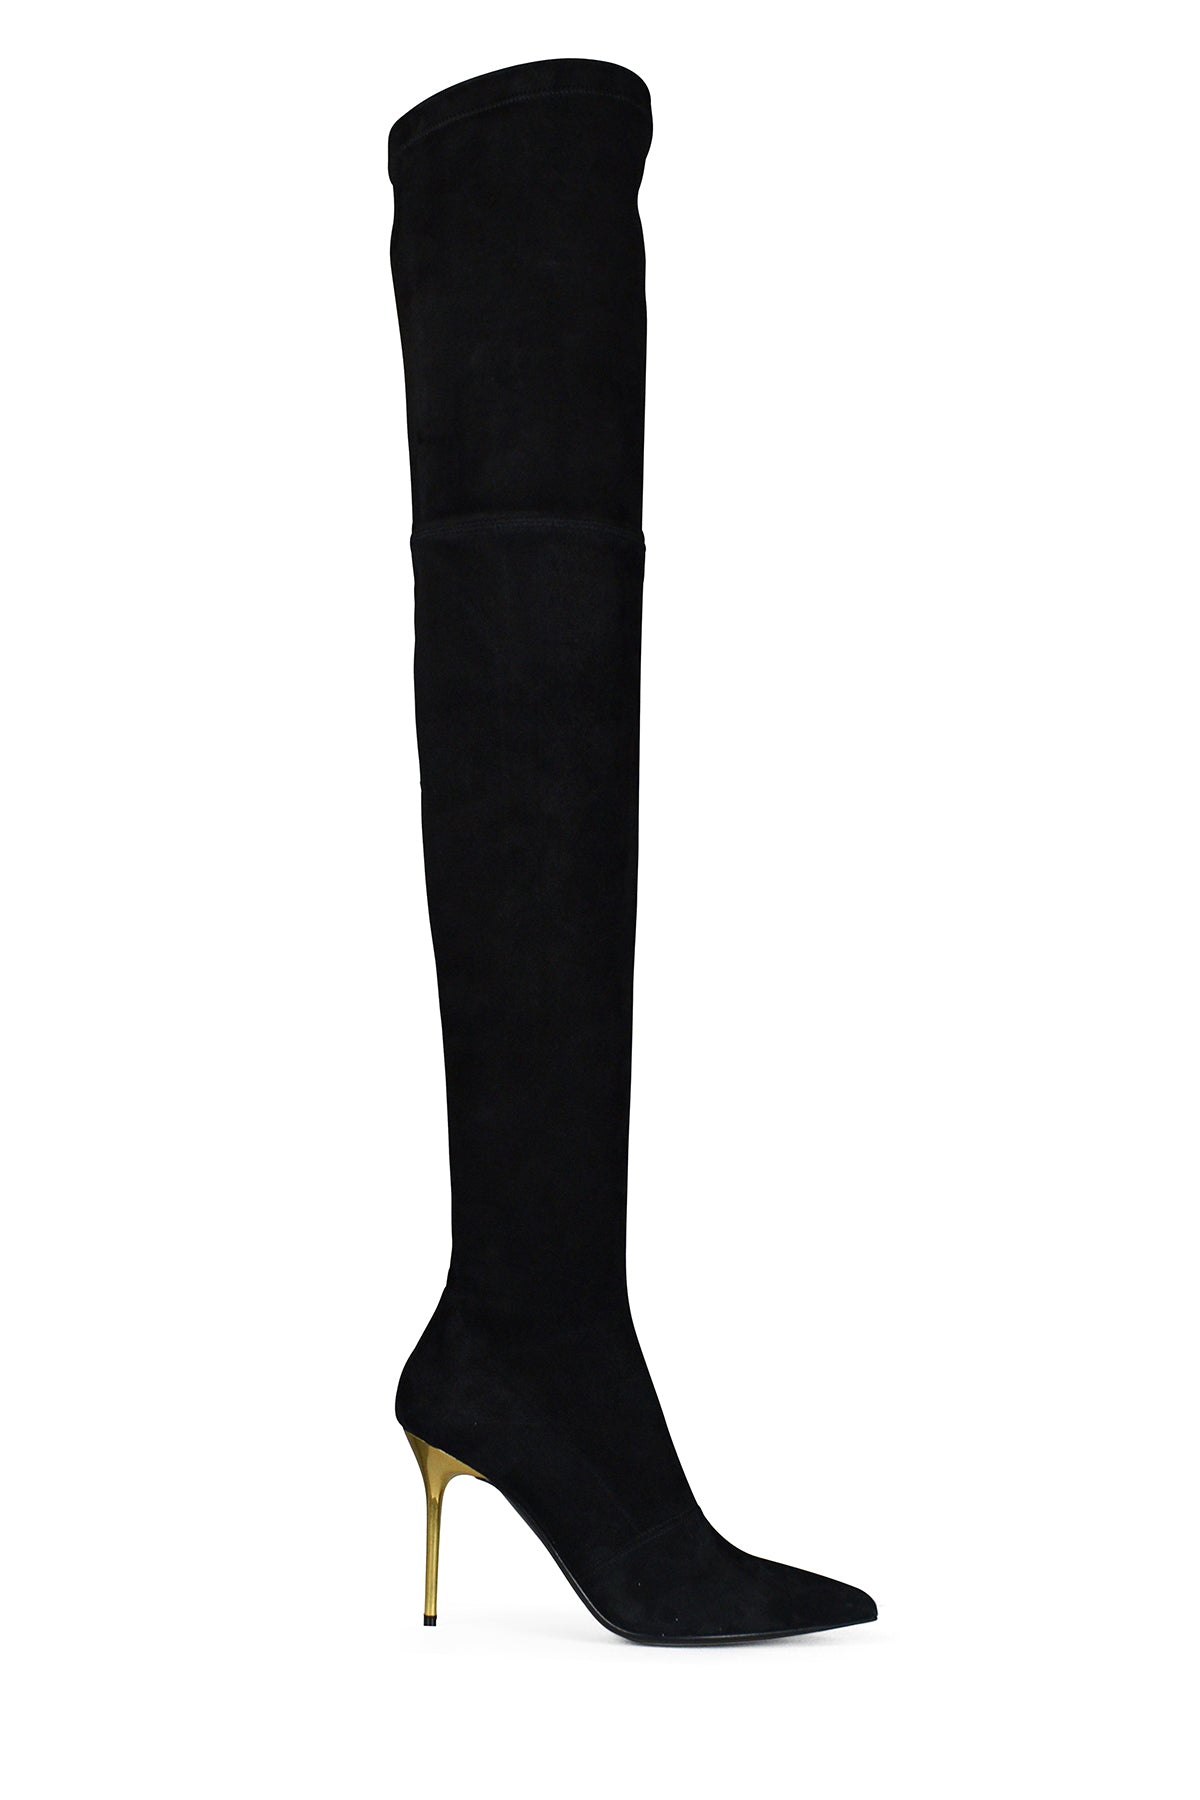 Black Suede Over-The-Knee Boots - 7